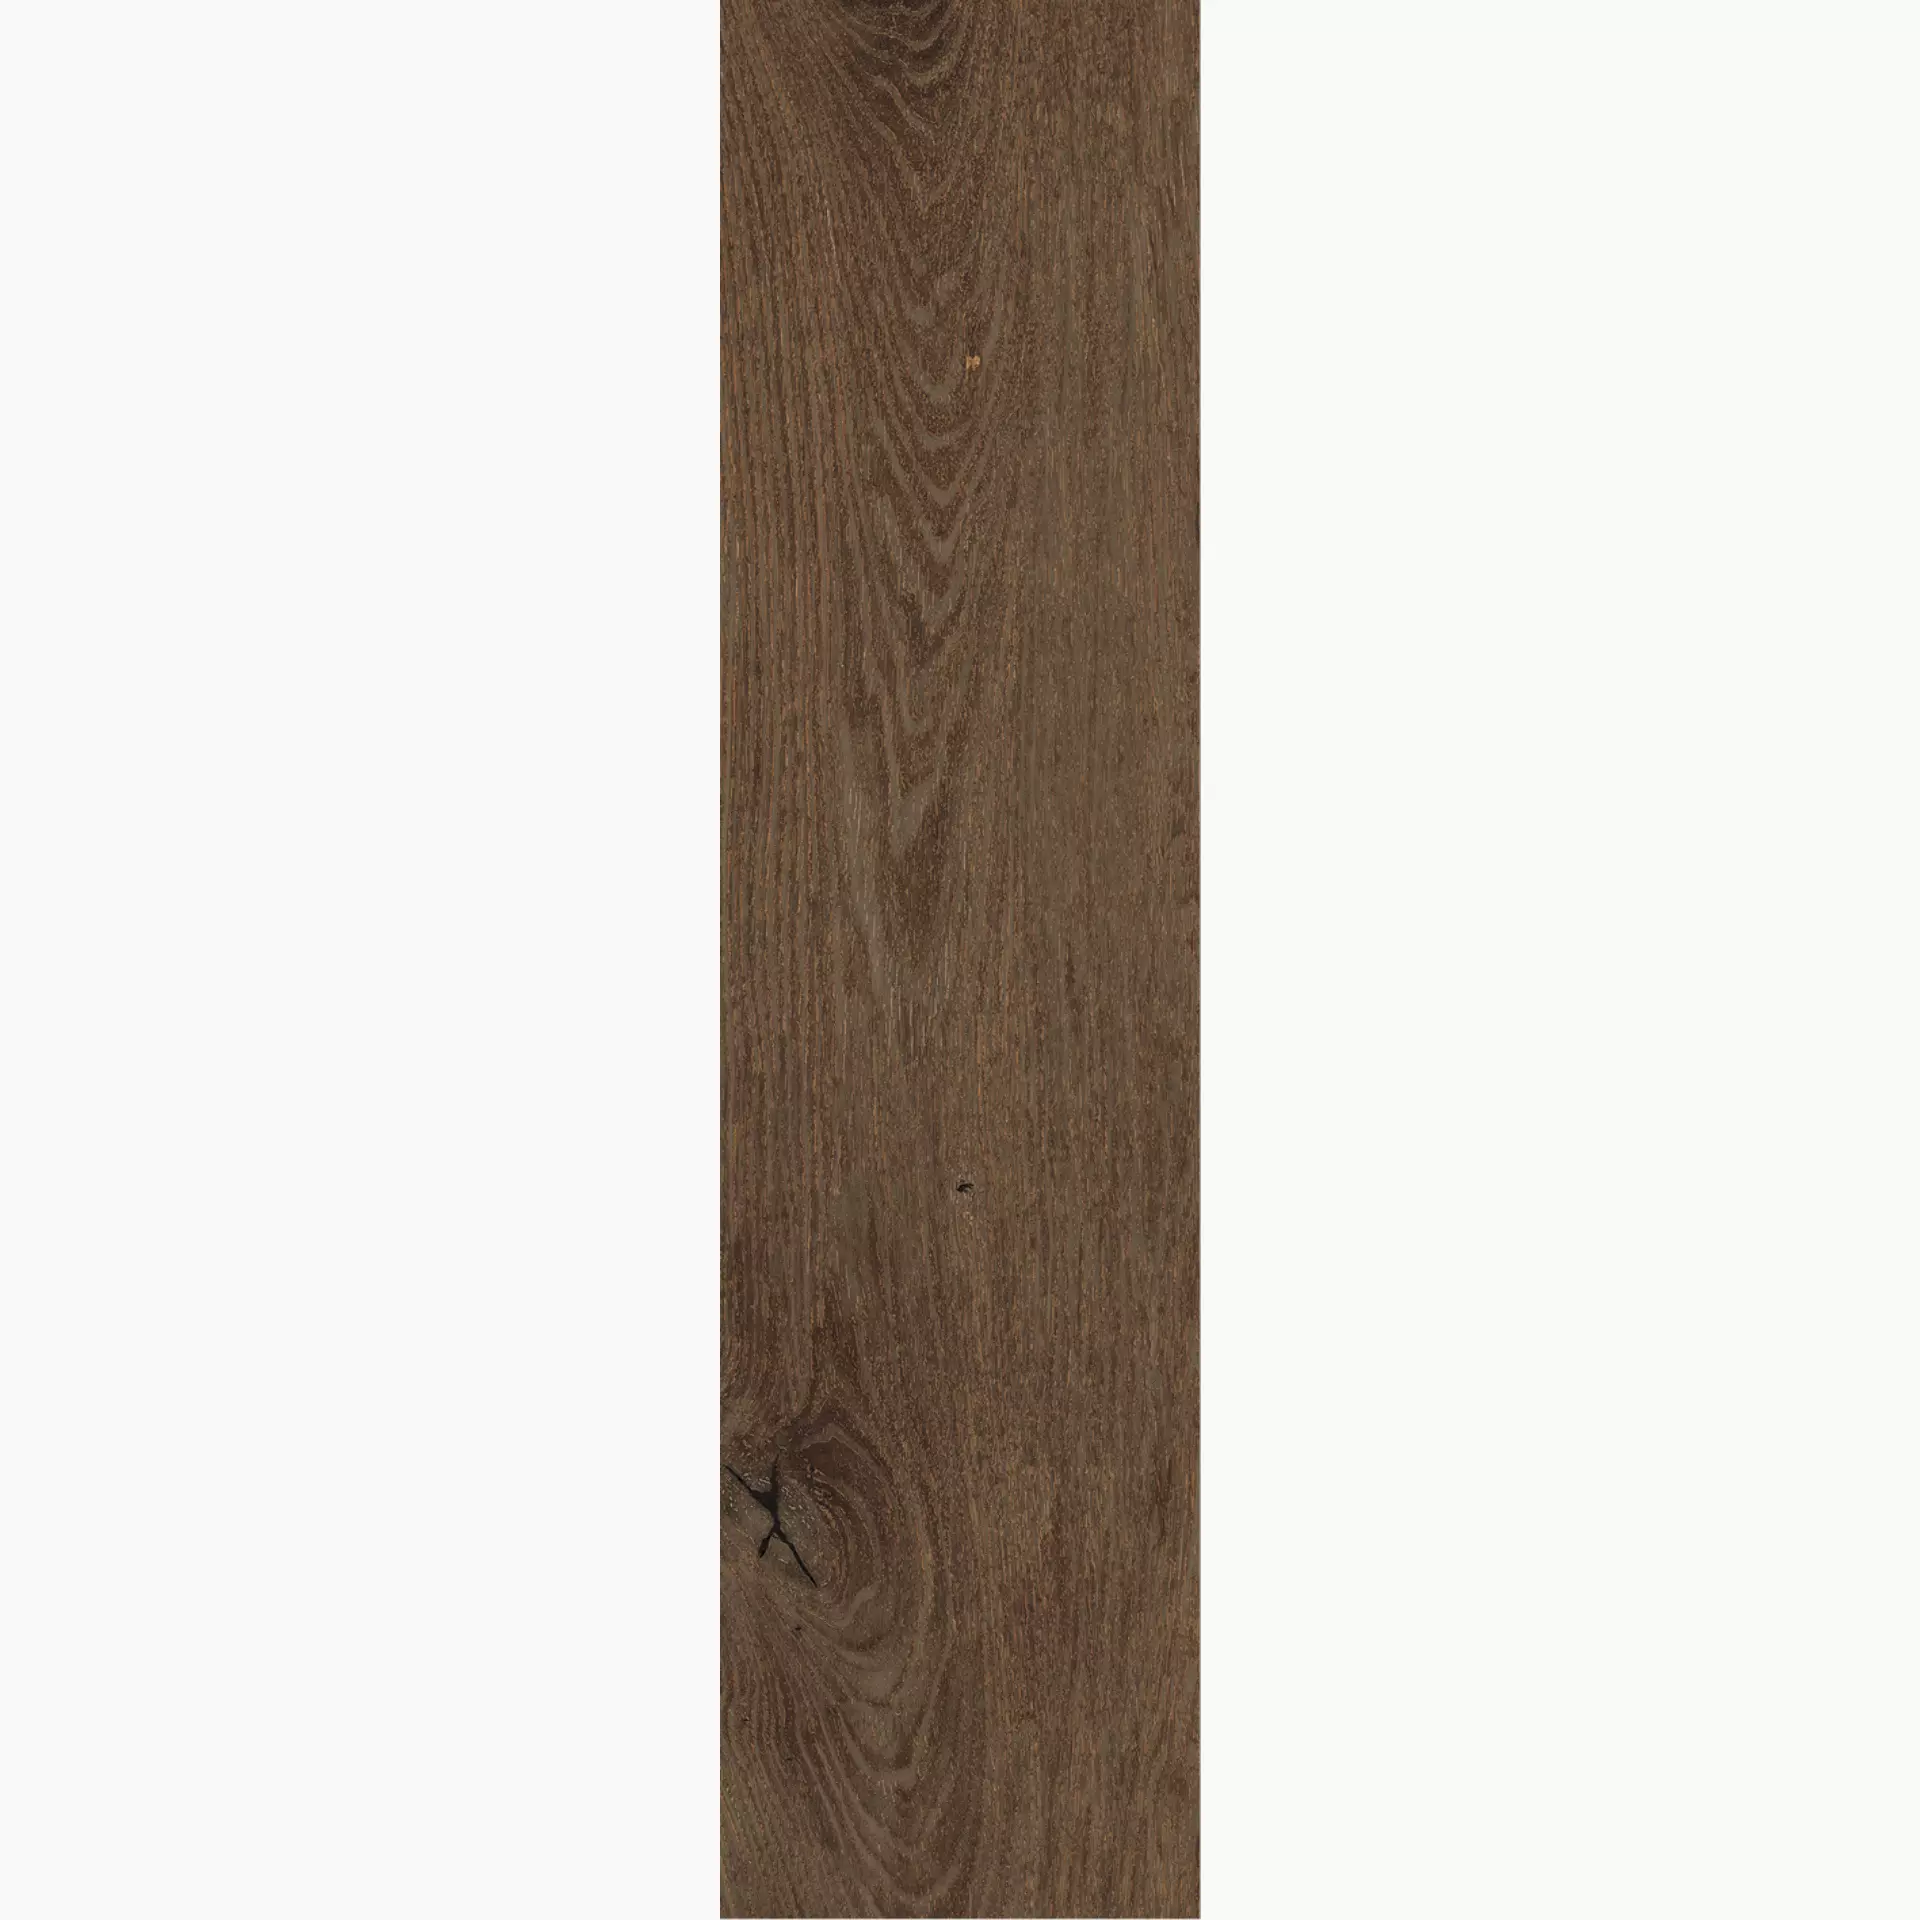 Novabell Artwood Wenge Naturale AWD63RT 30x120cm rectified 9mm